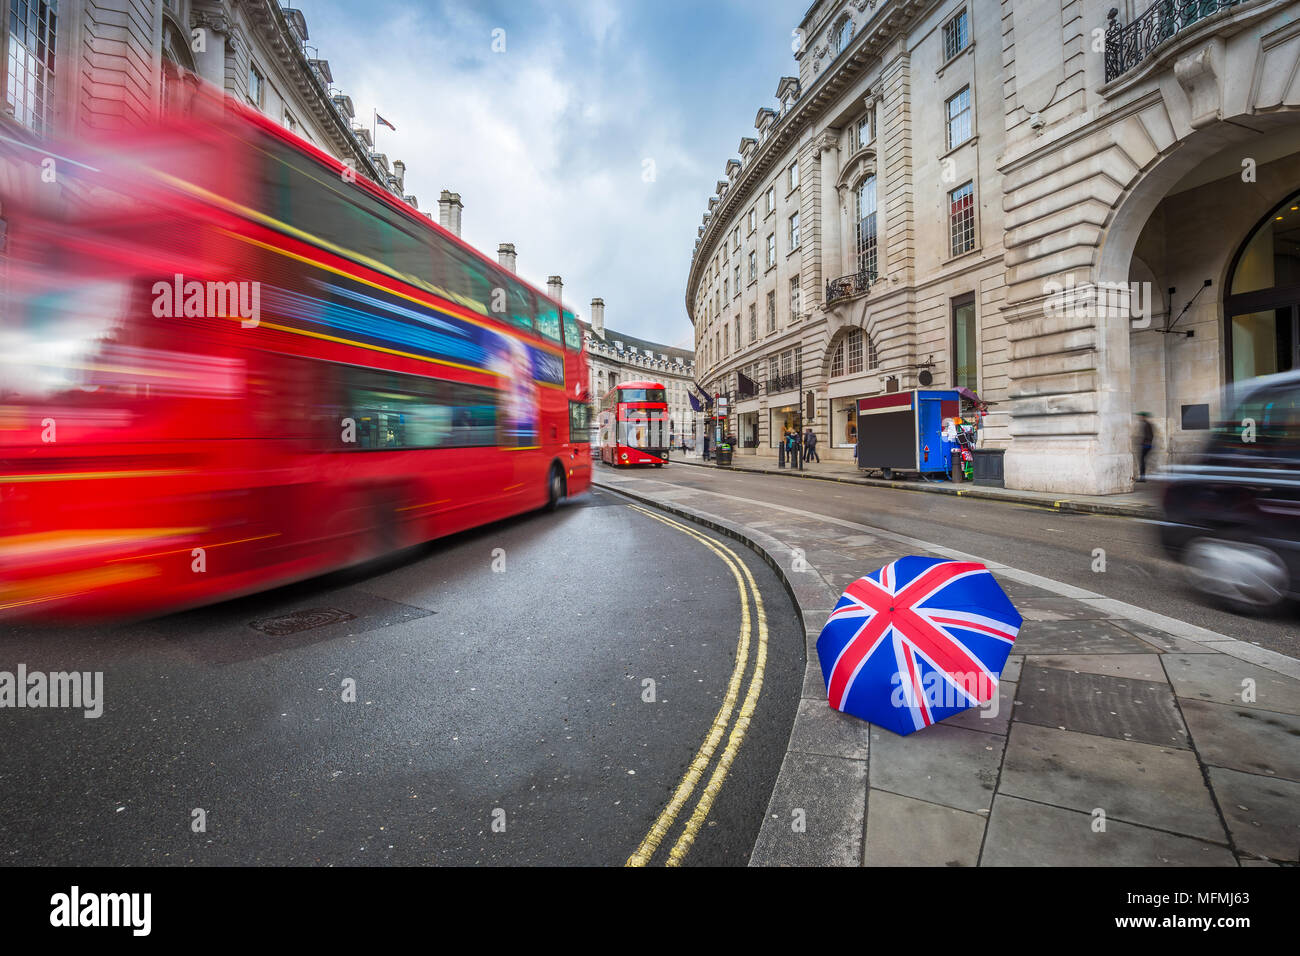 London, England - Iconic red double-decker buses and black taxi on the move on Regent Street with british umbrella Stock Photo